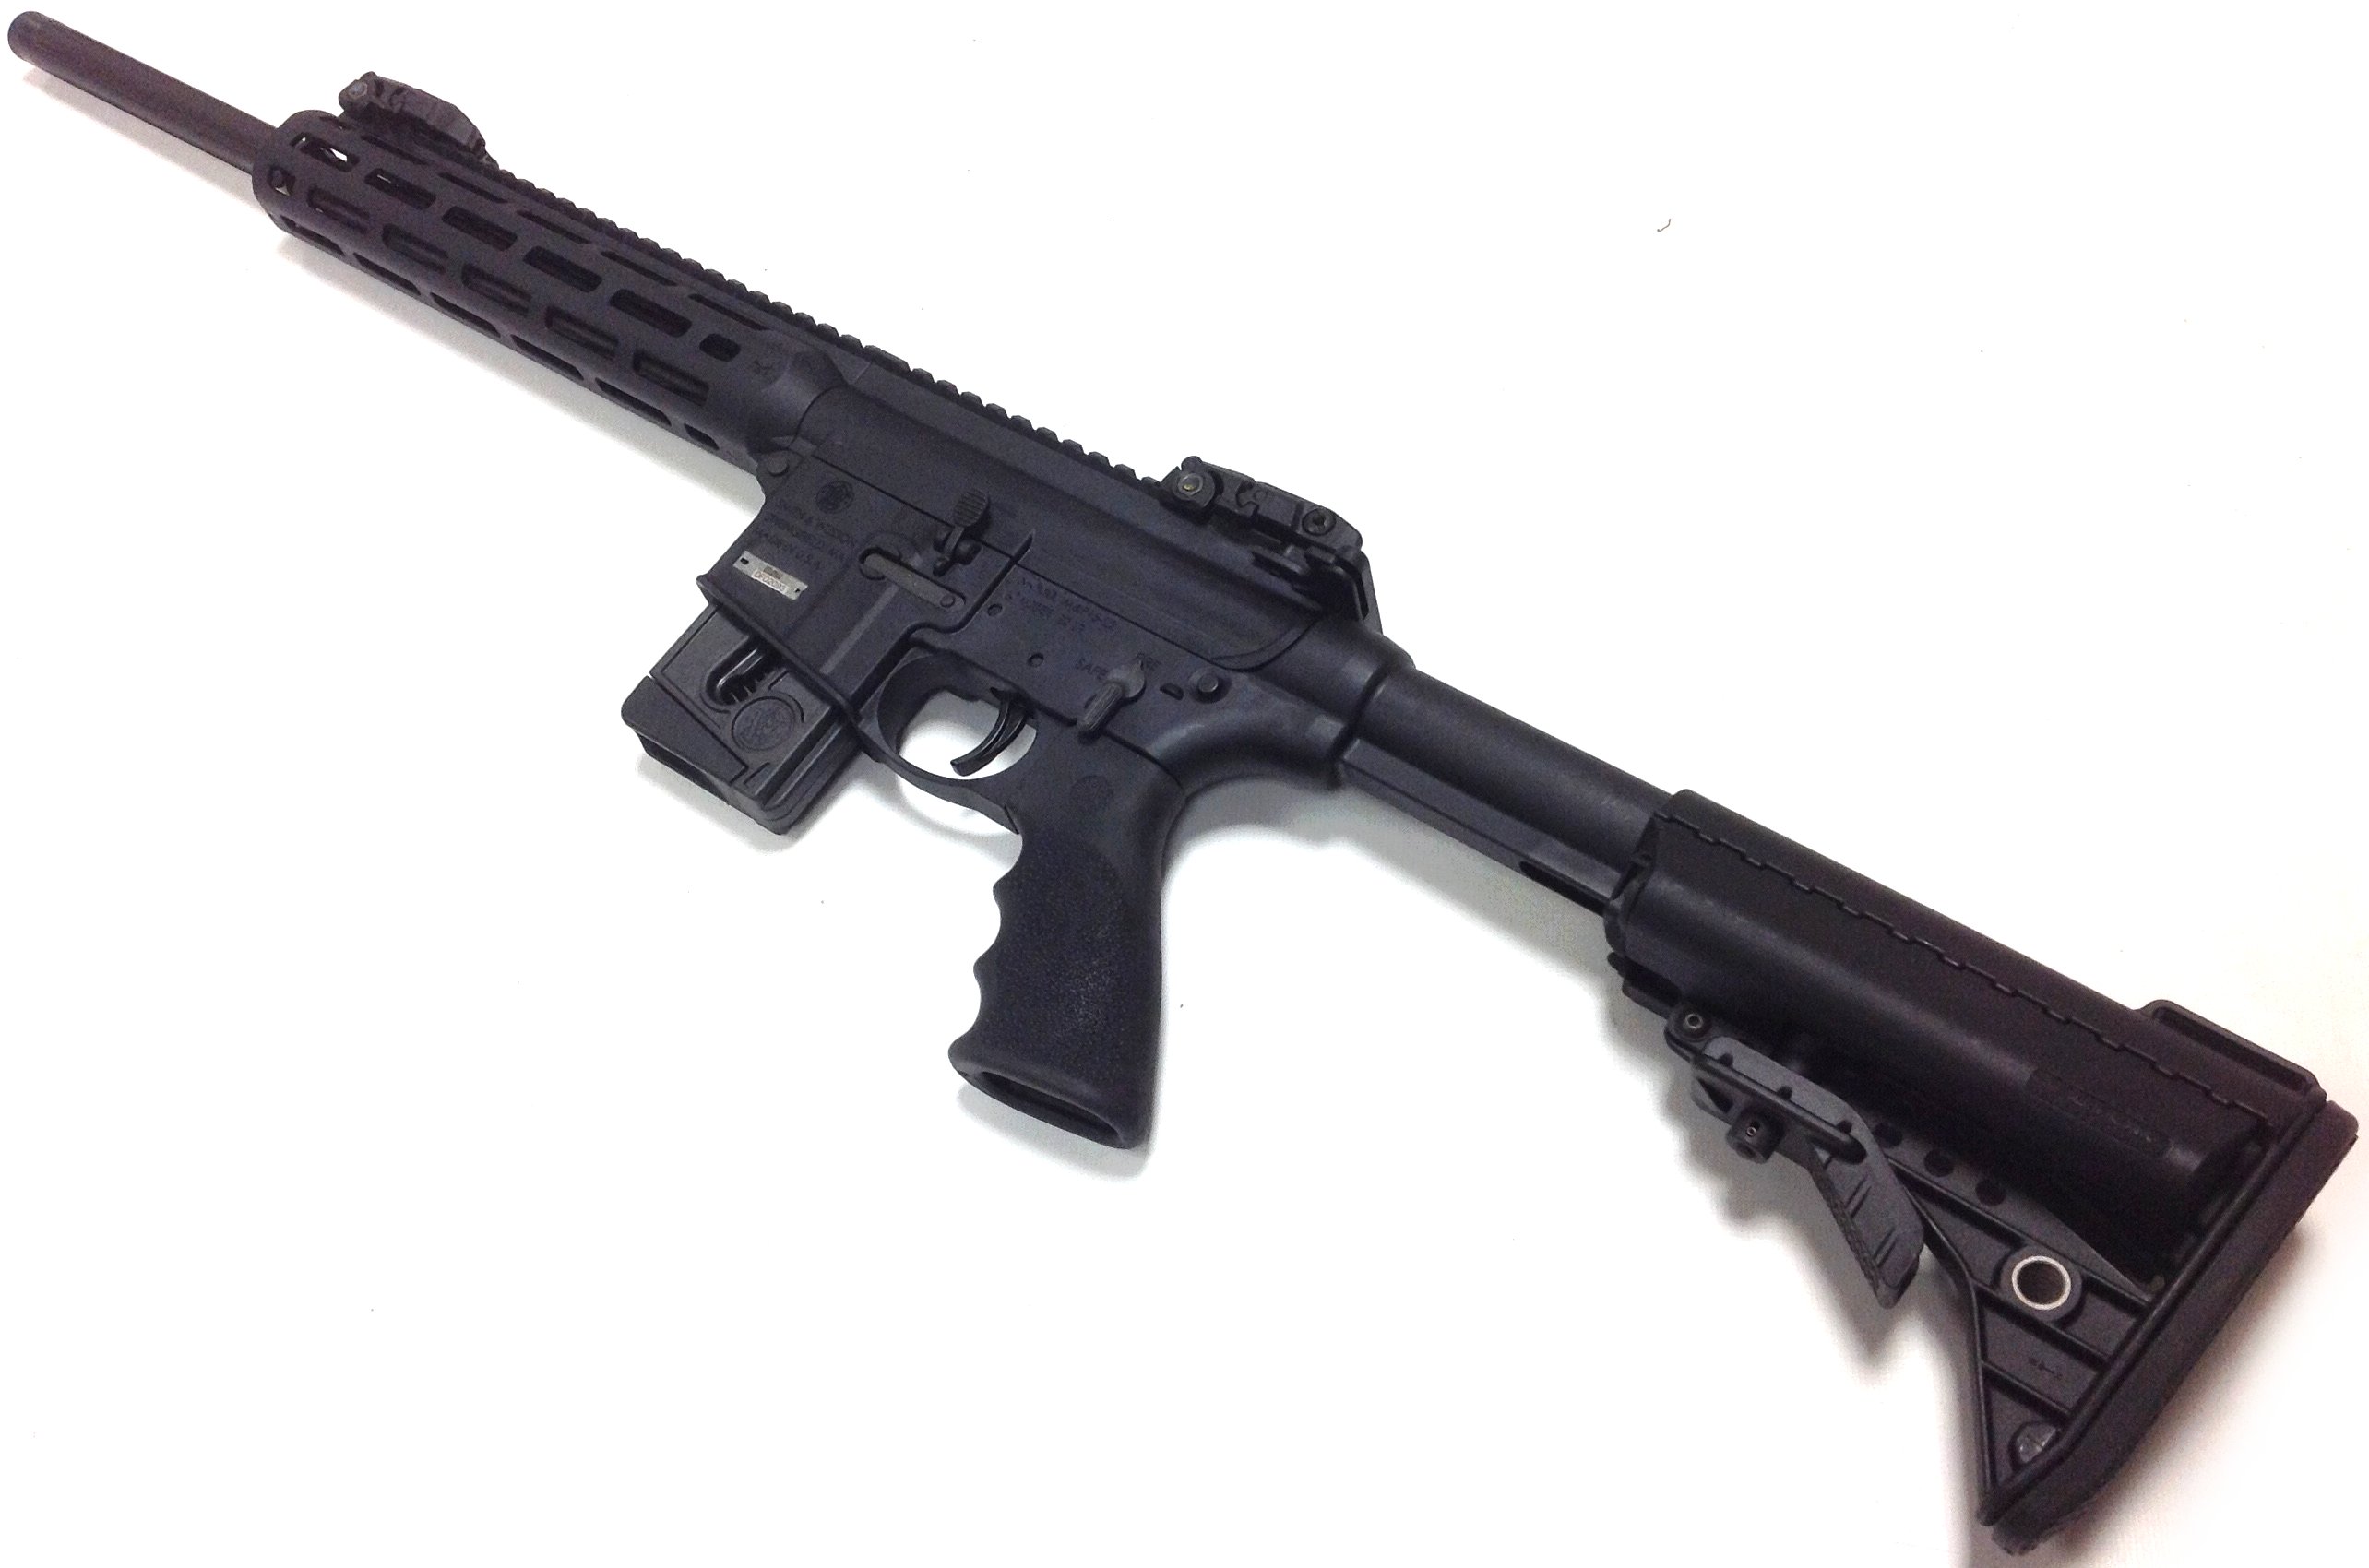 Smith & Wesson M&P 15-22 Rifle With Fluted Match Grade Barrel